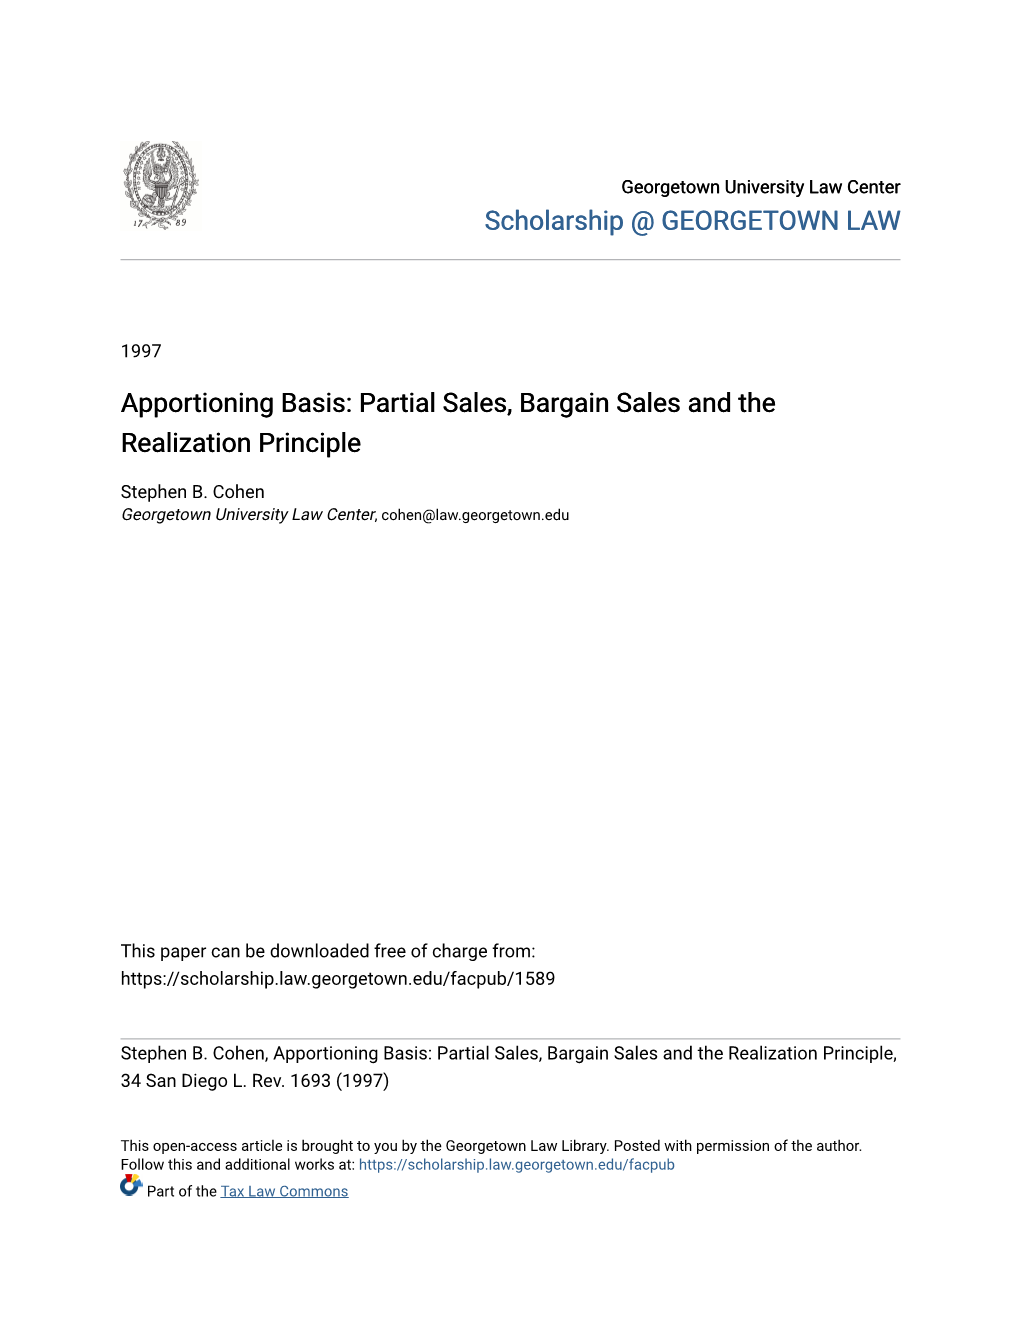 Apportioning Basis: Partial Sales, Bargain Sales and the Realization Principle